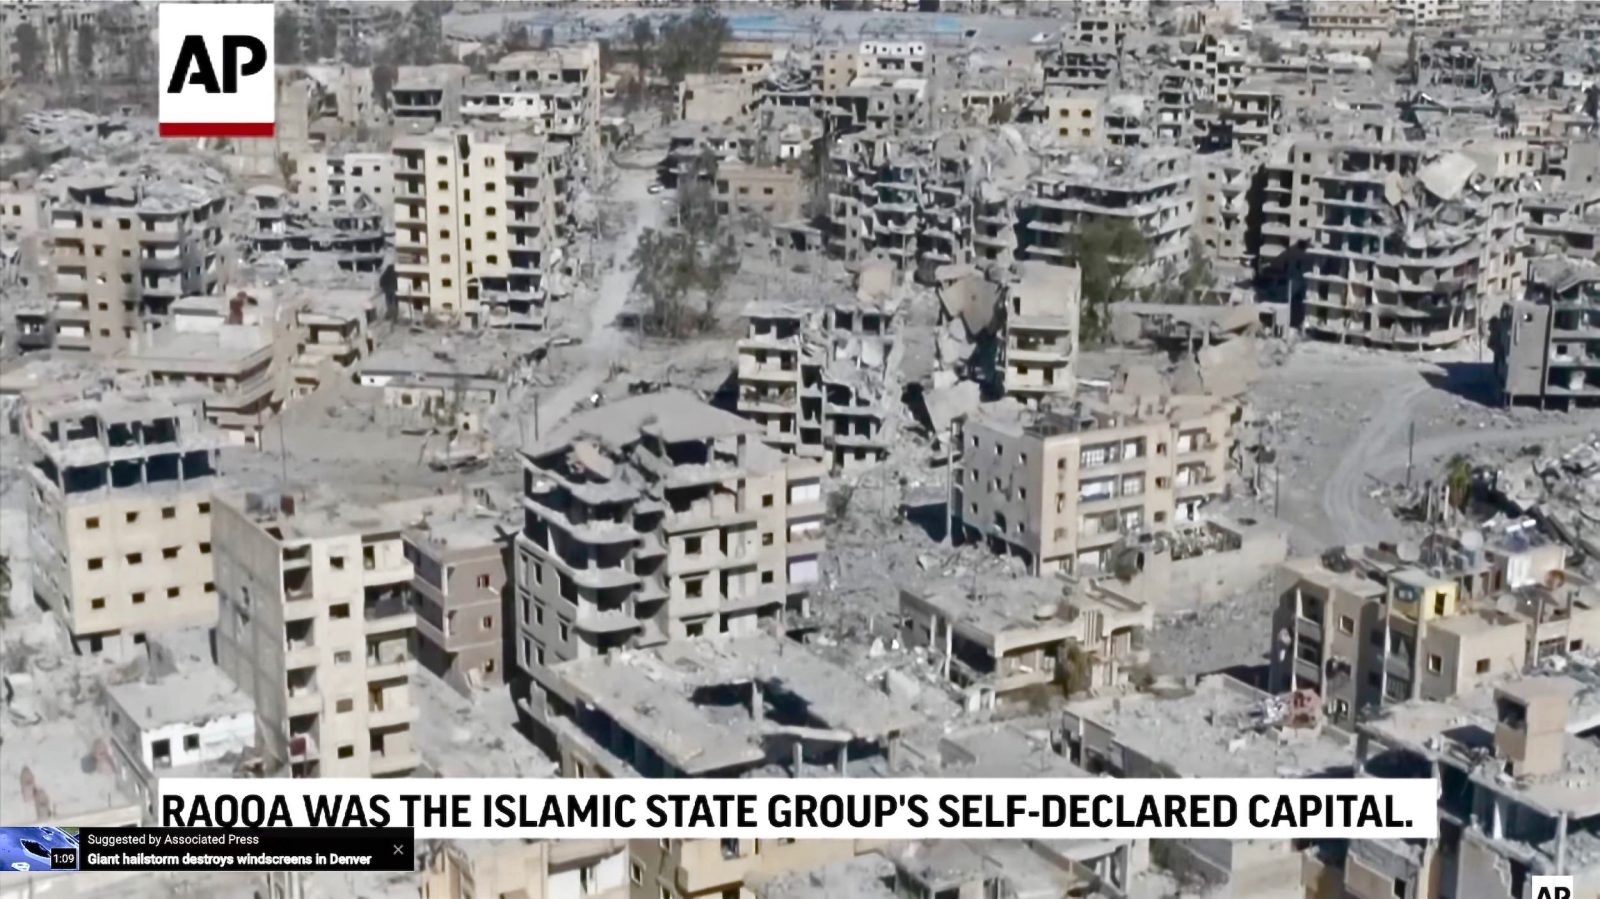 Drone video shows utter destruction of Raqqa, Syria